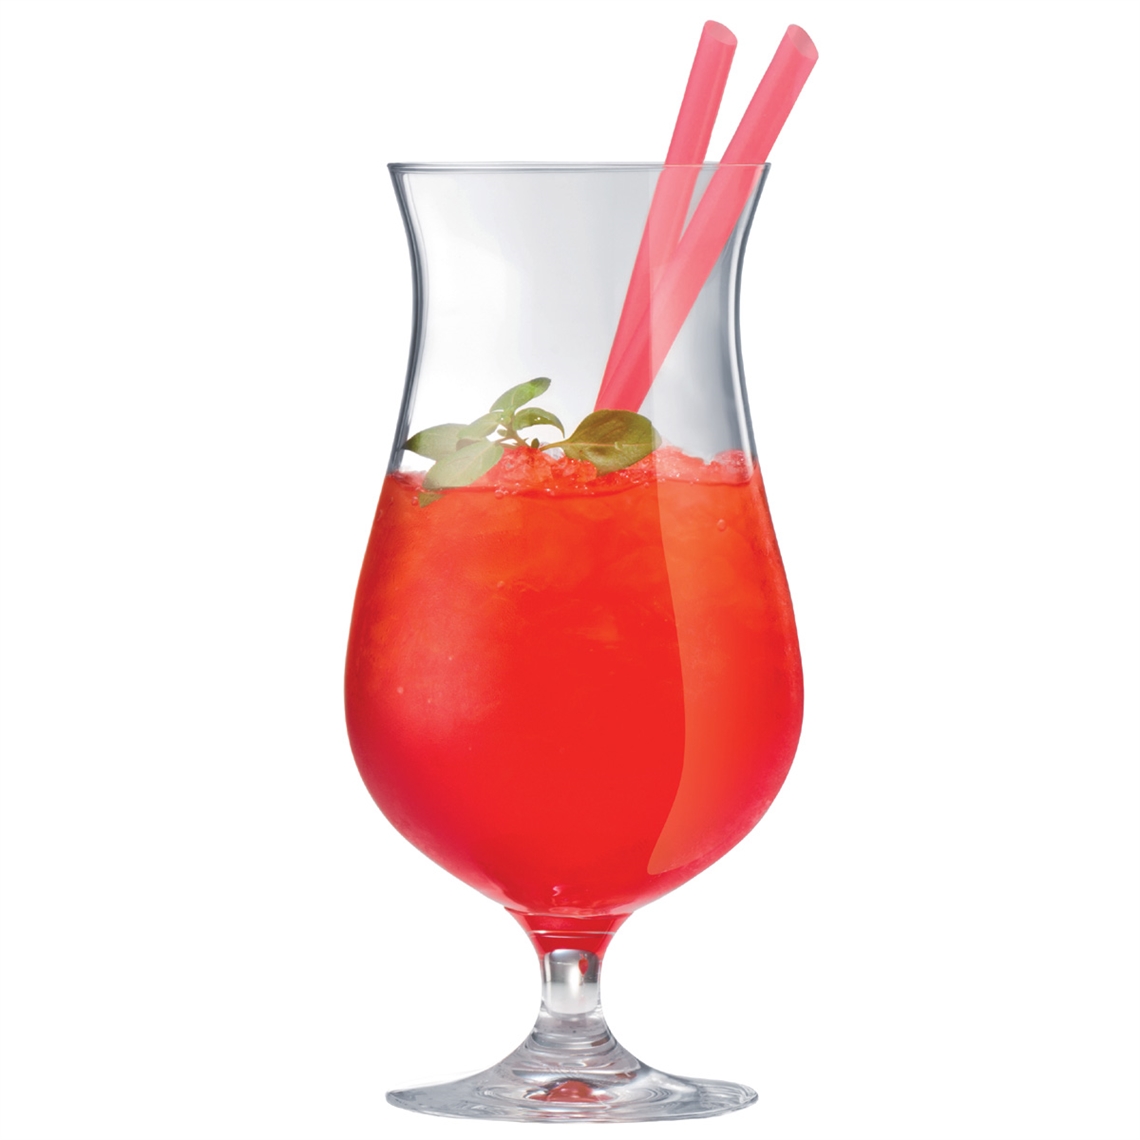 View more zalto from our Cocktail Glasses range